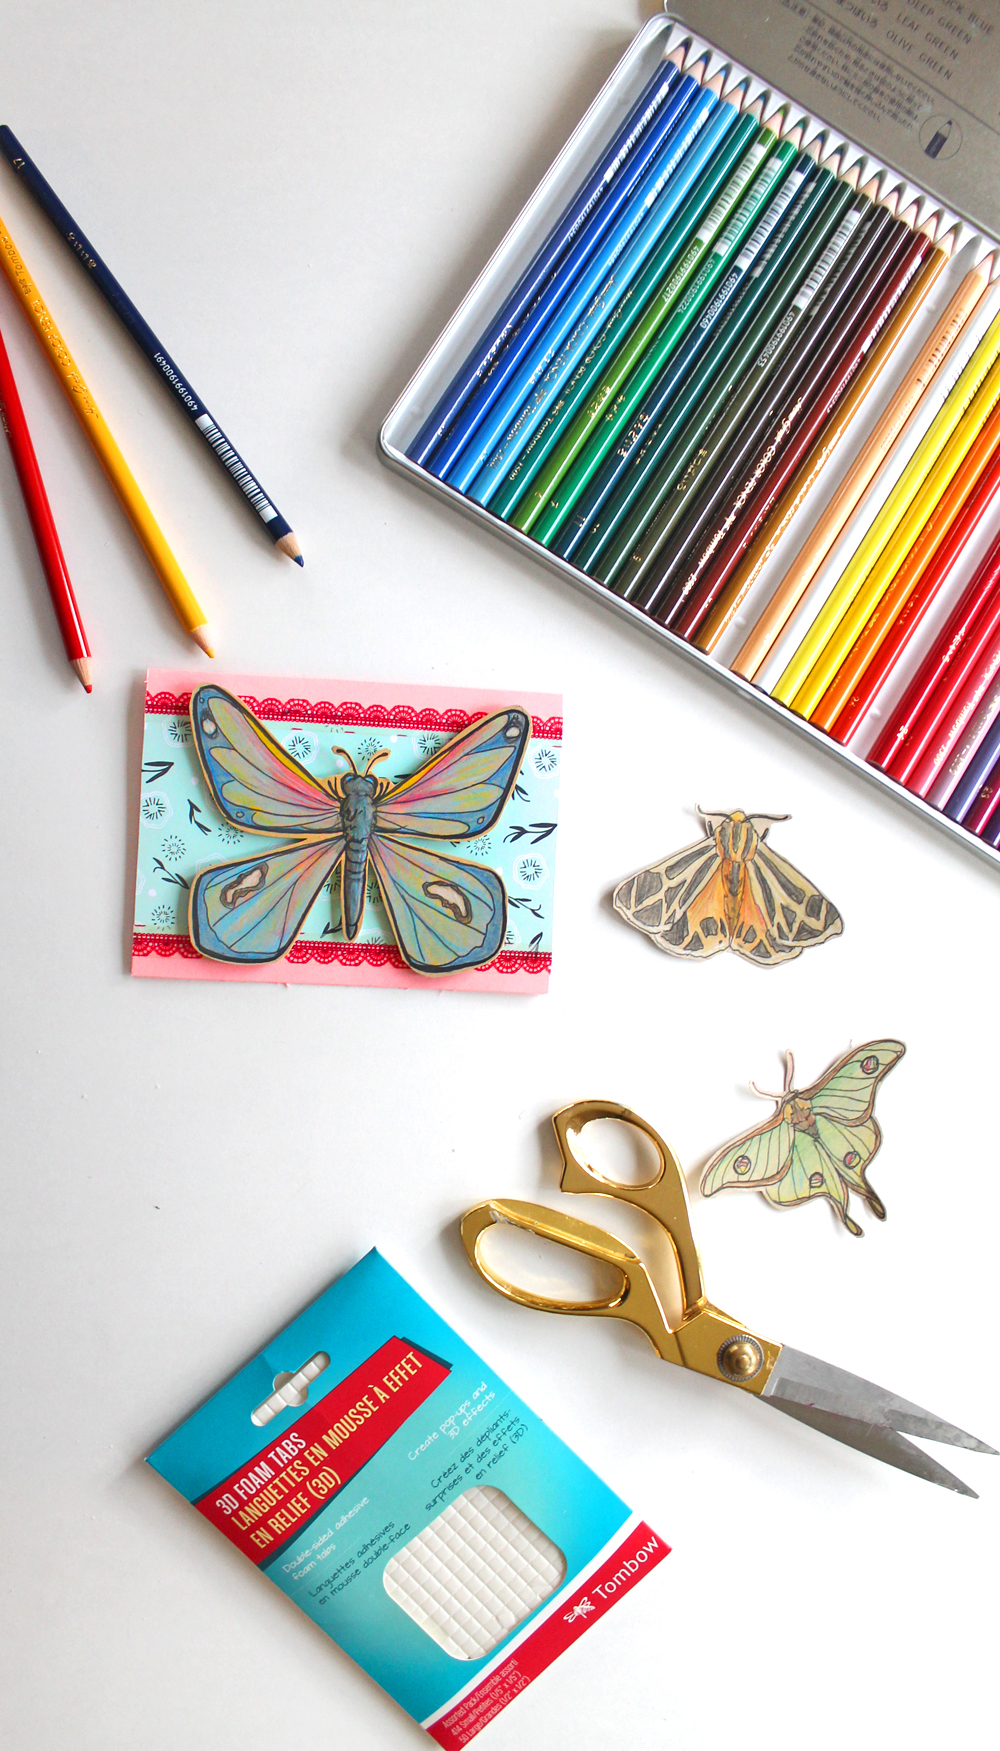 Learn how to Draw and Color Butterflies with @studiokatie using Tombows new 1500 Colored Pencils